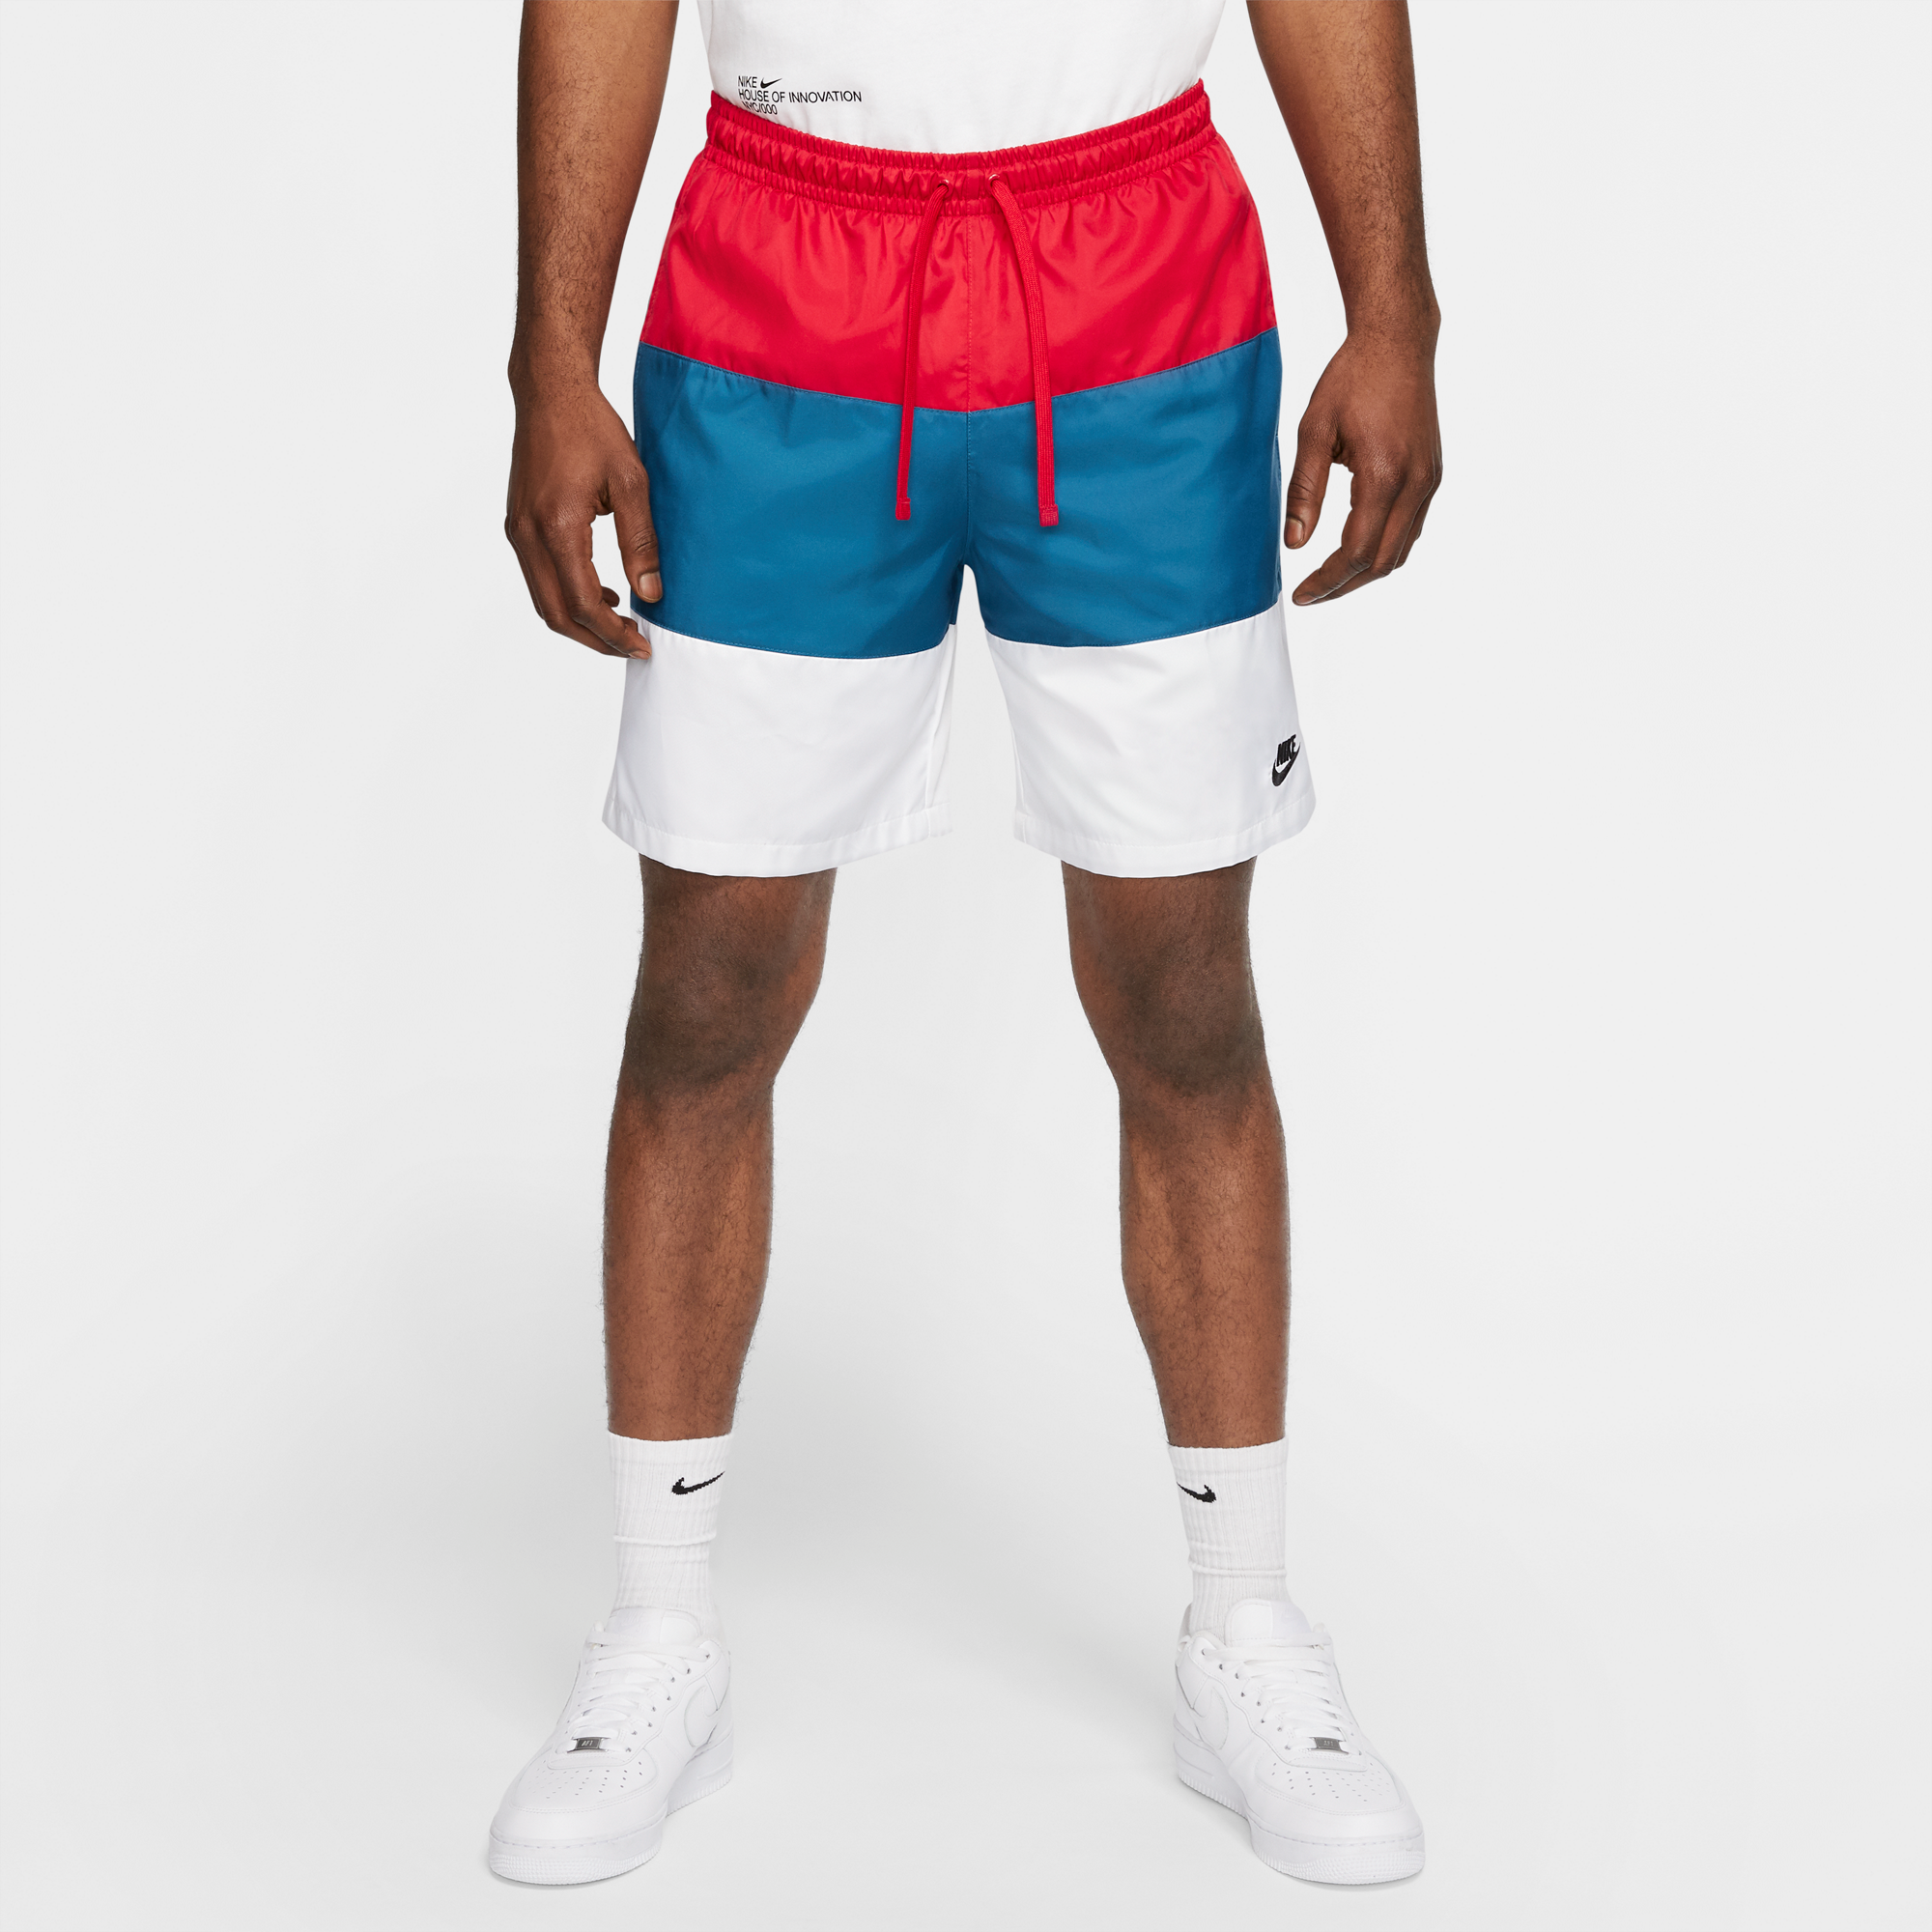 nike loose fit above knee length